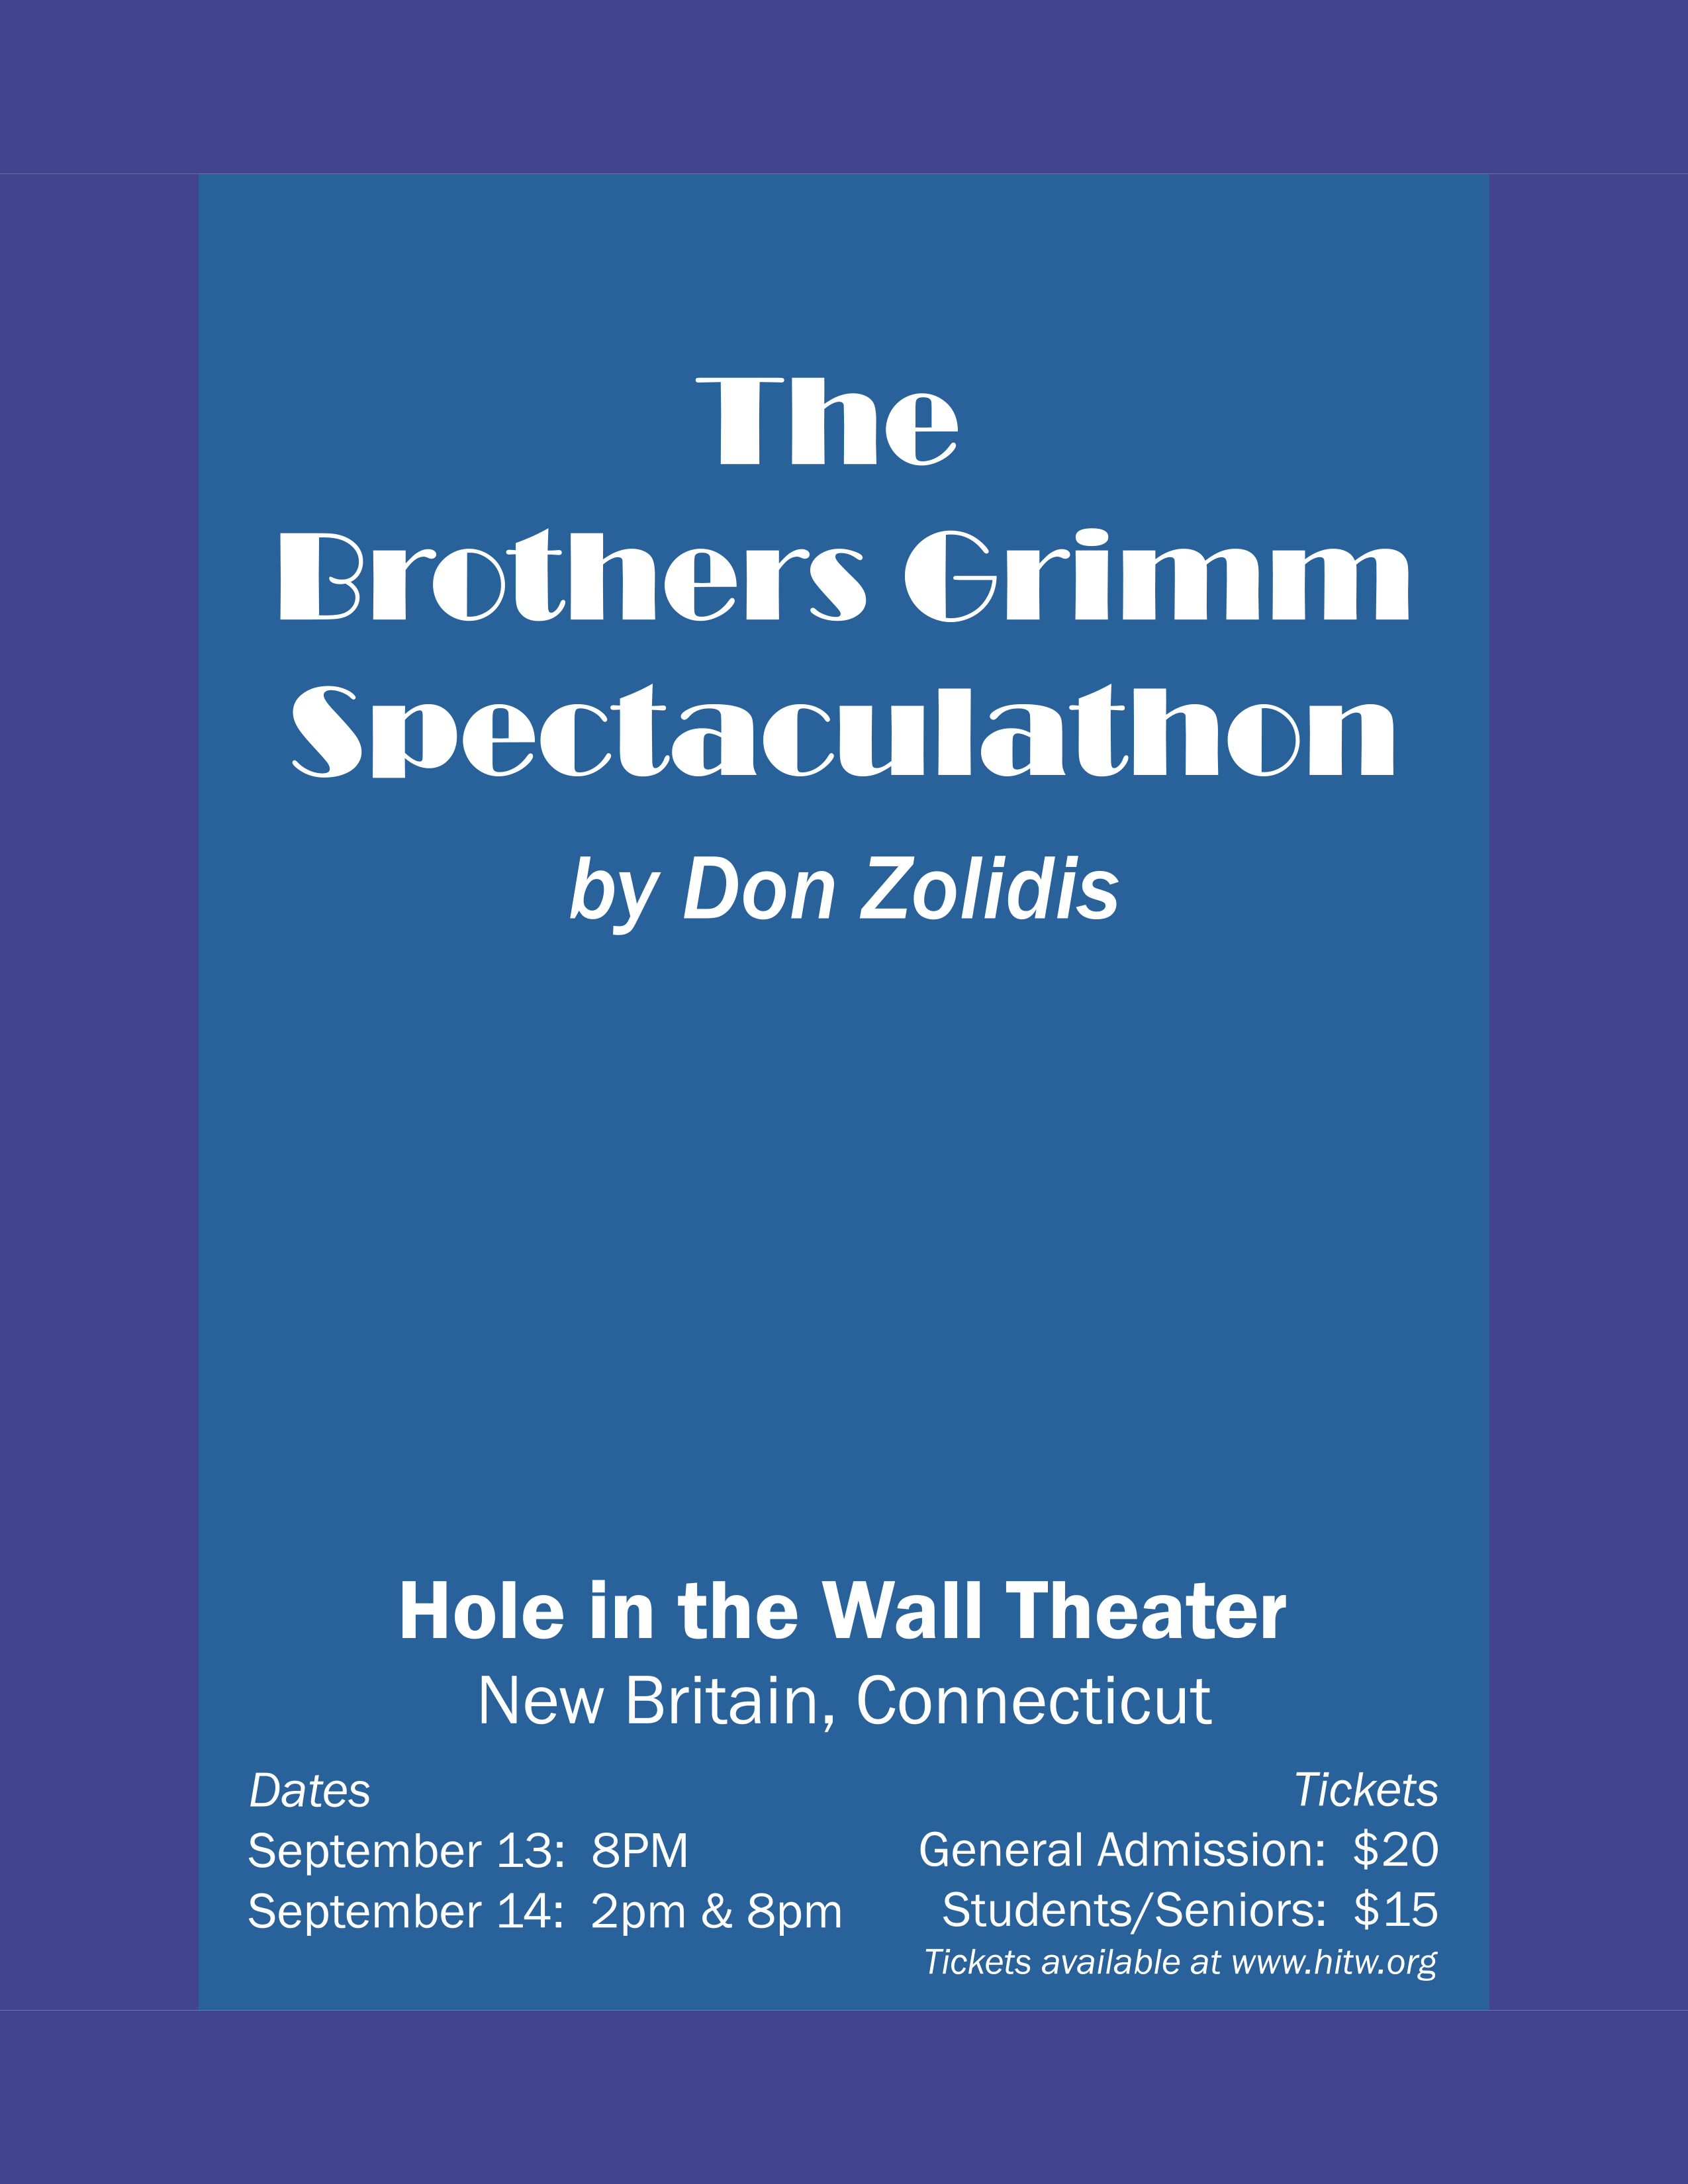 The Brothers Grimm Spectaculathon Poster